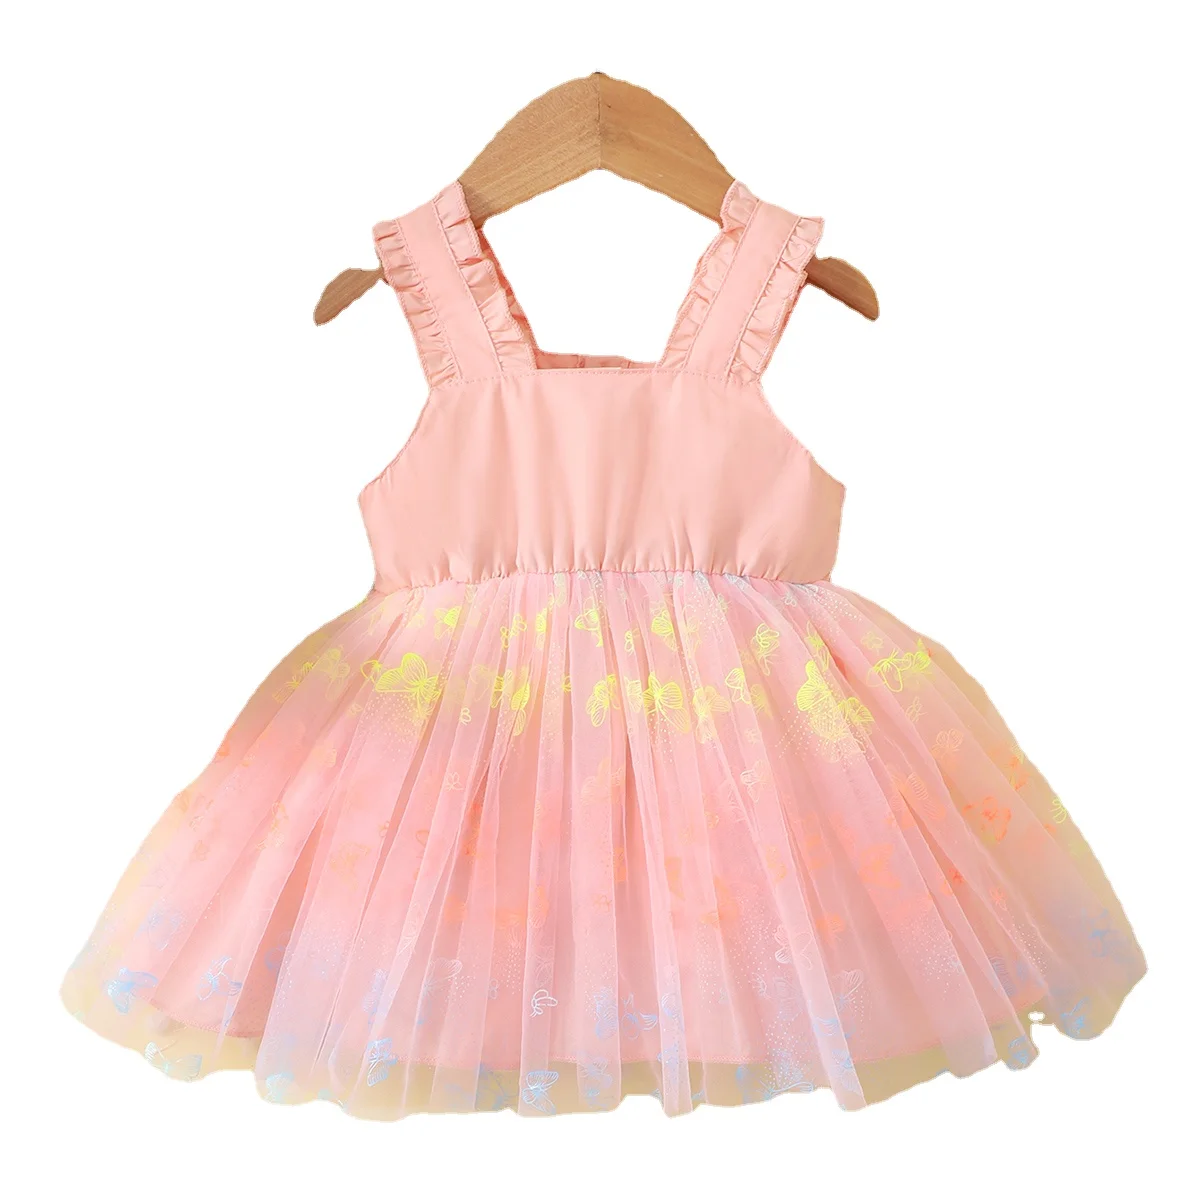 Infant Baby Girl Clothes Sling Butterfly Tutu Princess Dress For Toddler Girl Clothing Newborn Girl Summer Fashion Dresses Outfi